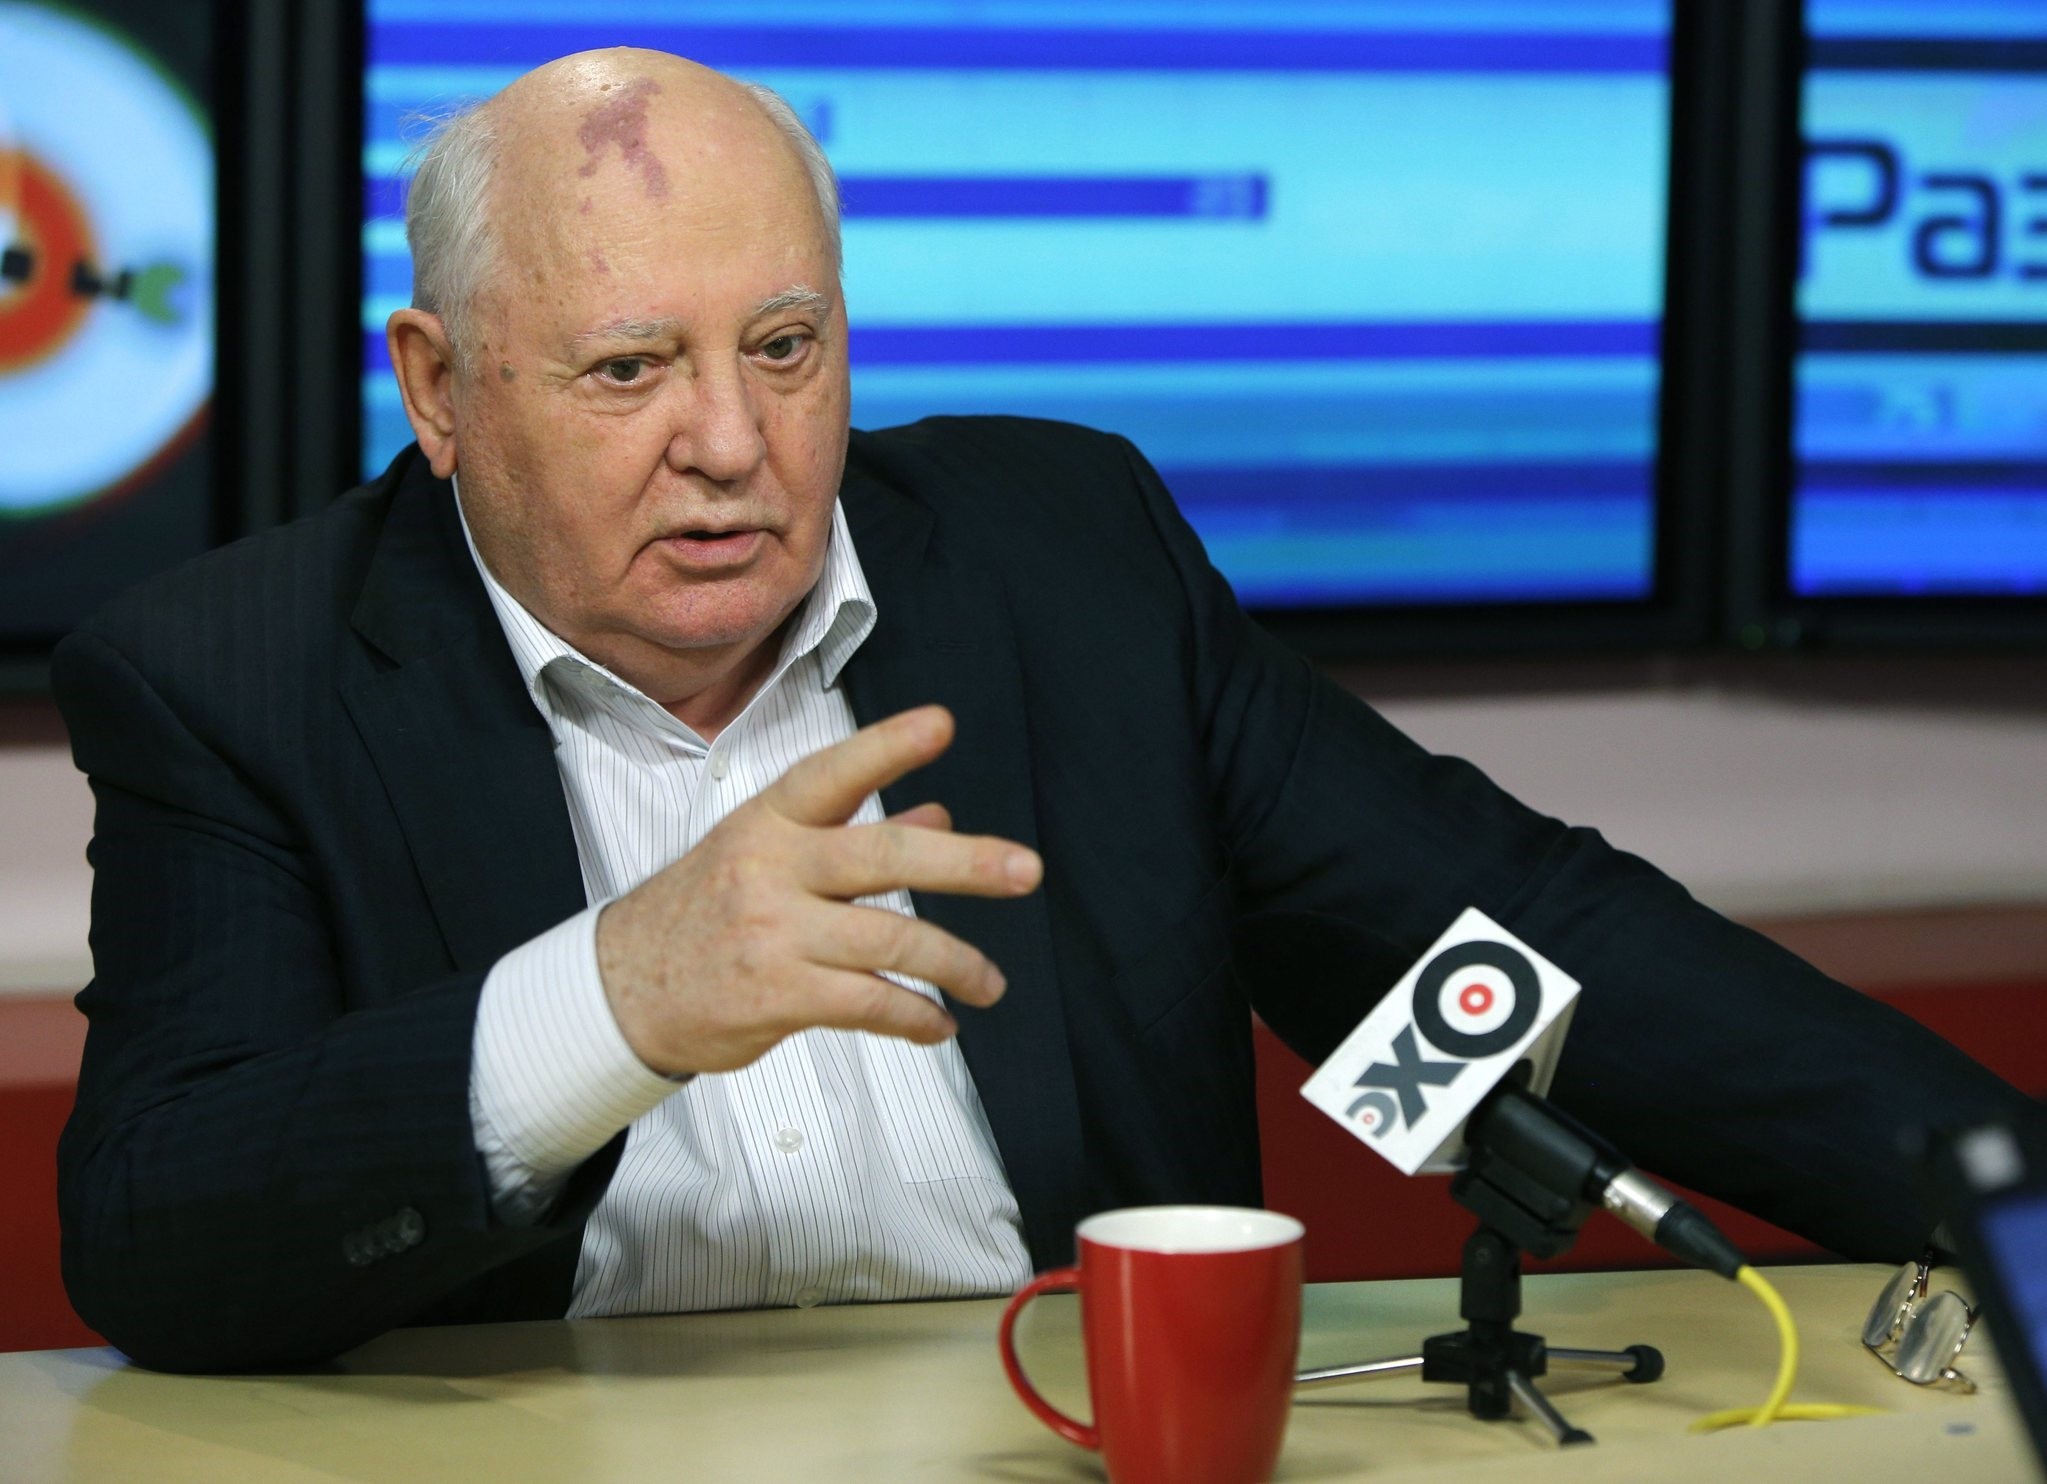 In this photo taken late Monday, Nov. 12, 2012, former President of the Soviet Union Mikhail Gorbachev speaks to journalists on Ekho Moskvy radio in Moscow, Russia.  (AP Photo)